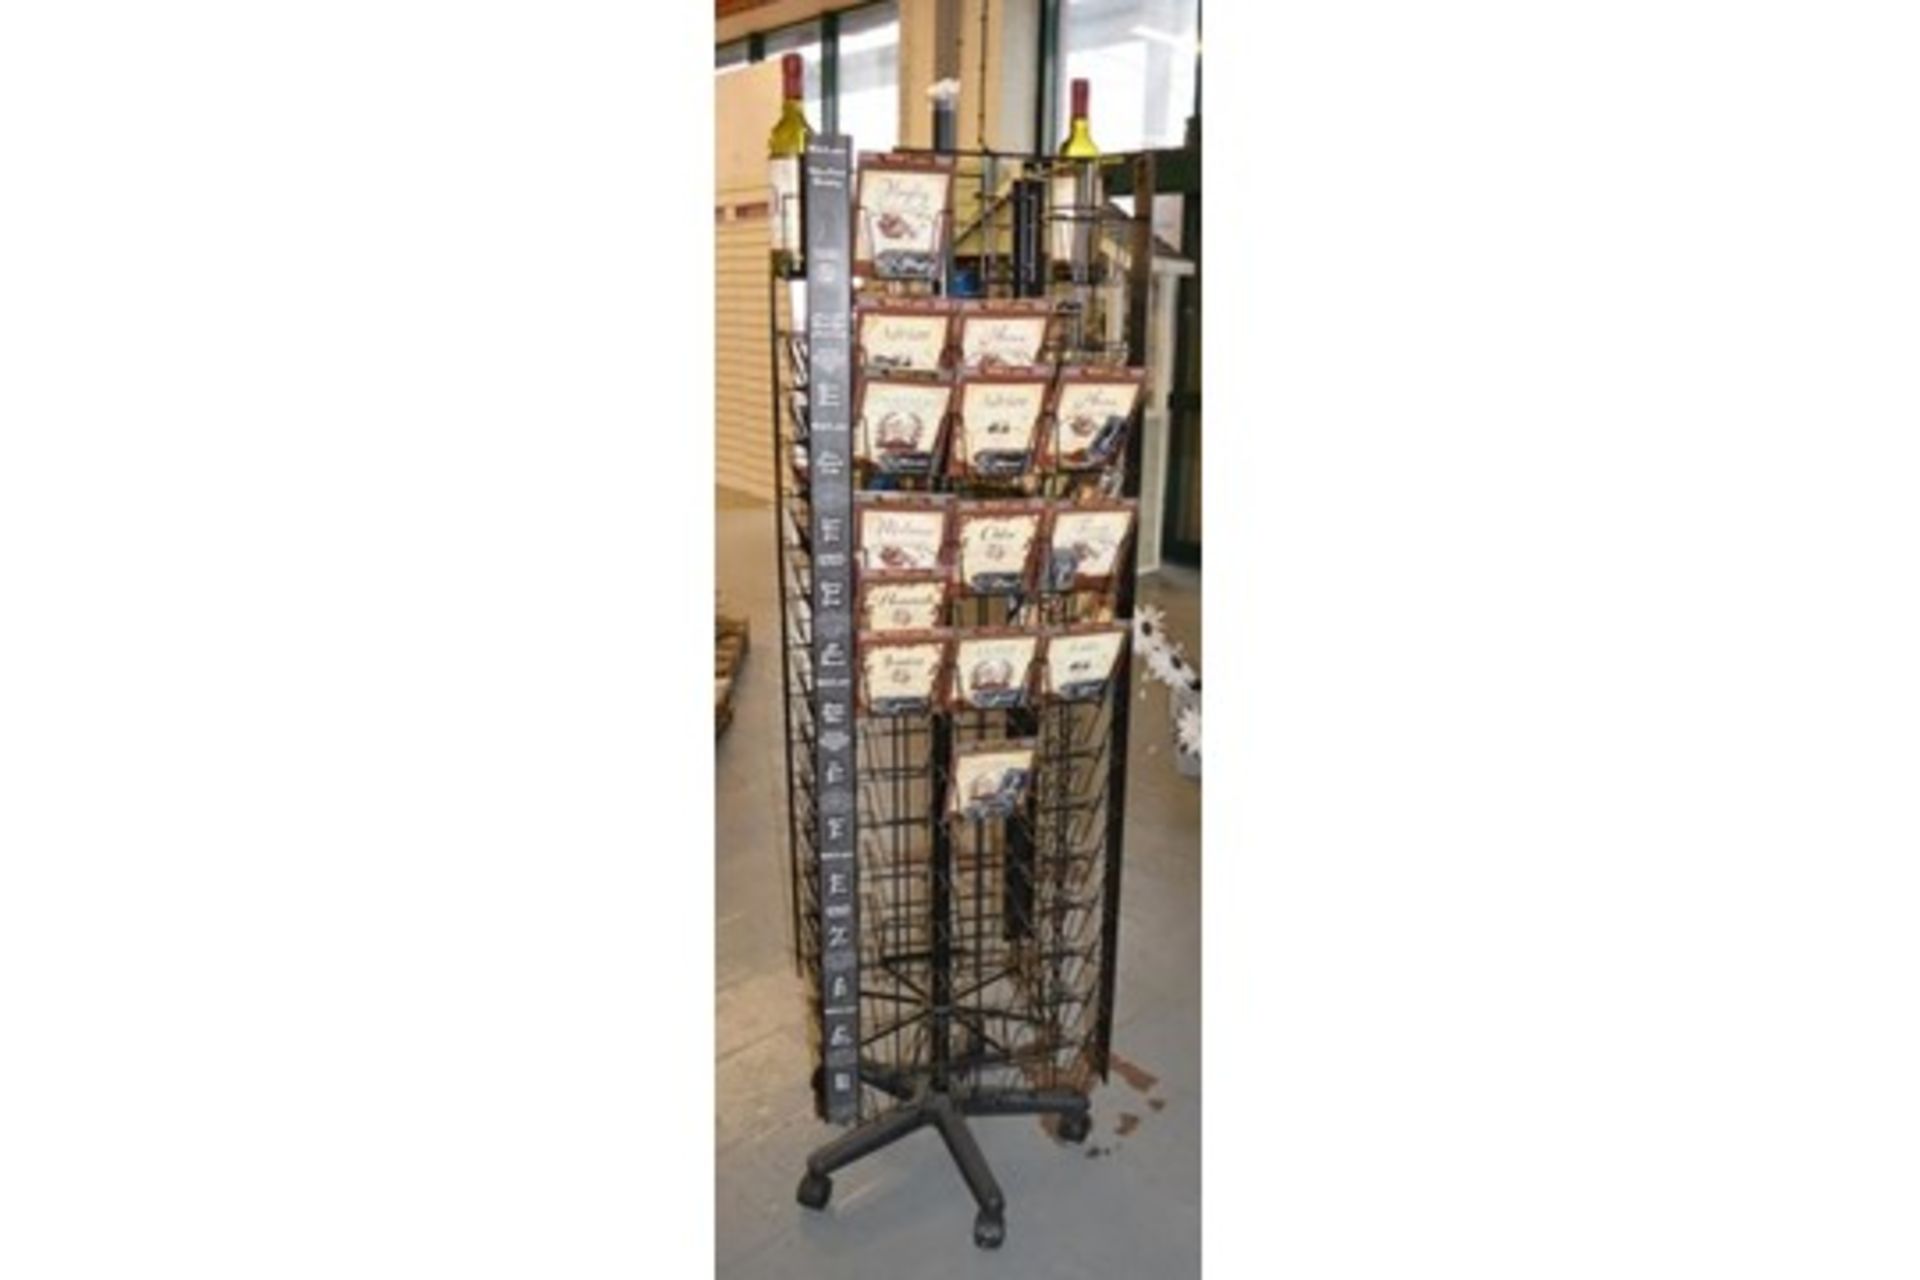 27 x Retail Carousel Display Stands With Approximately 2,800 Items of Resale Stock - Includes - Image 47 of 61